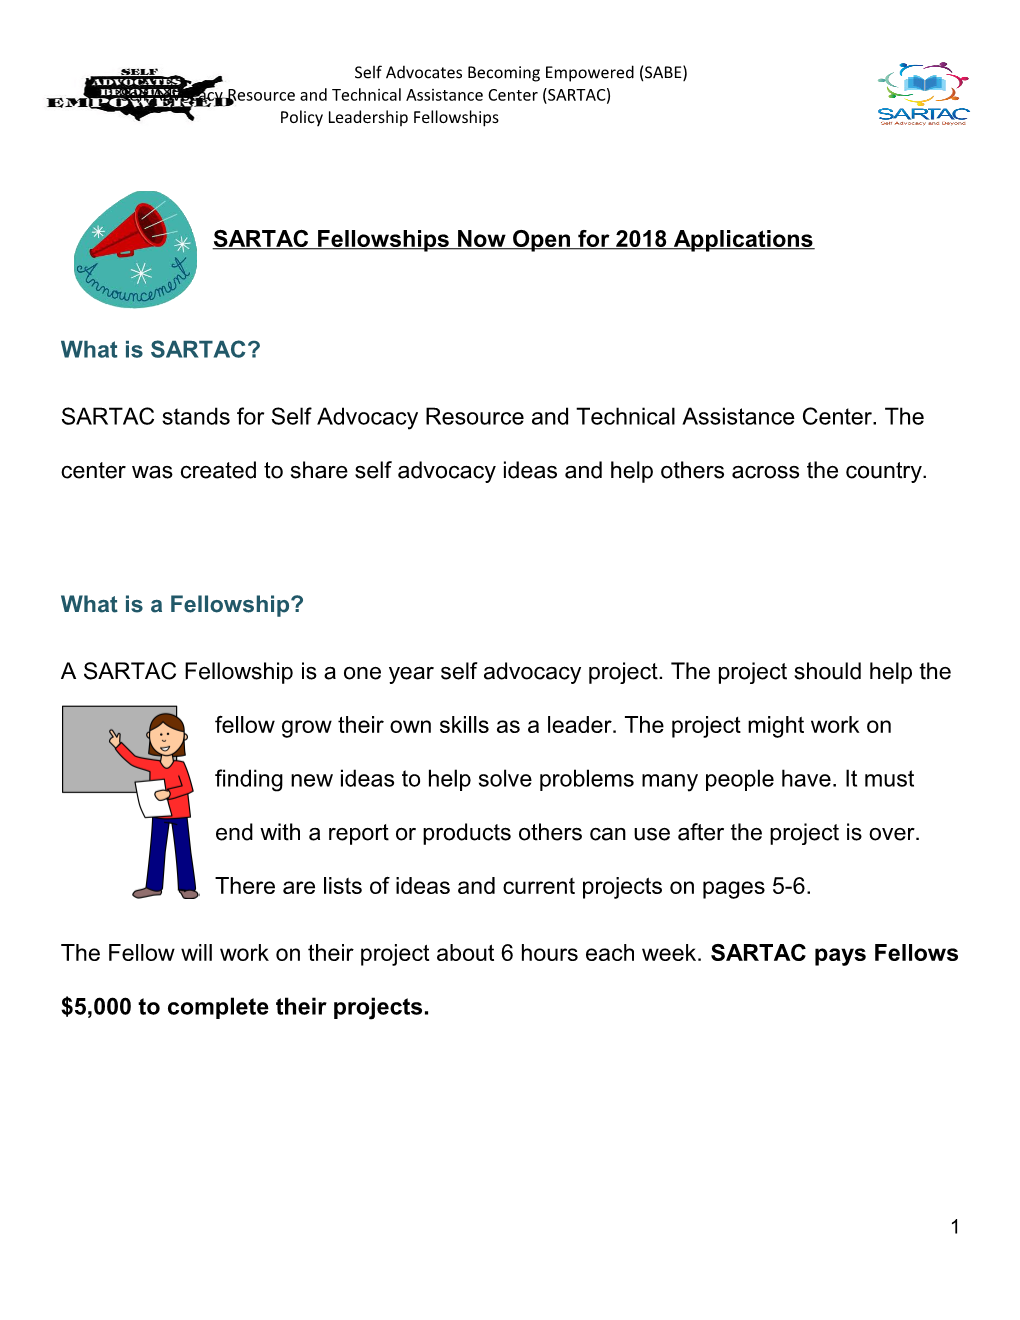 Self Advocacy Resource and Technical Assistance Center (SARTAC)